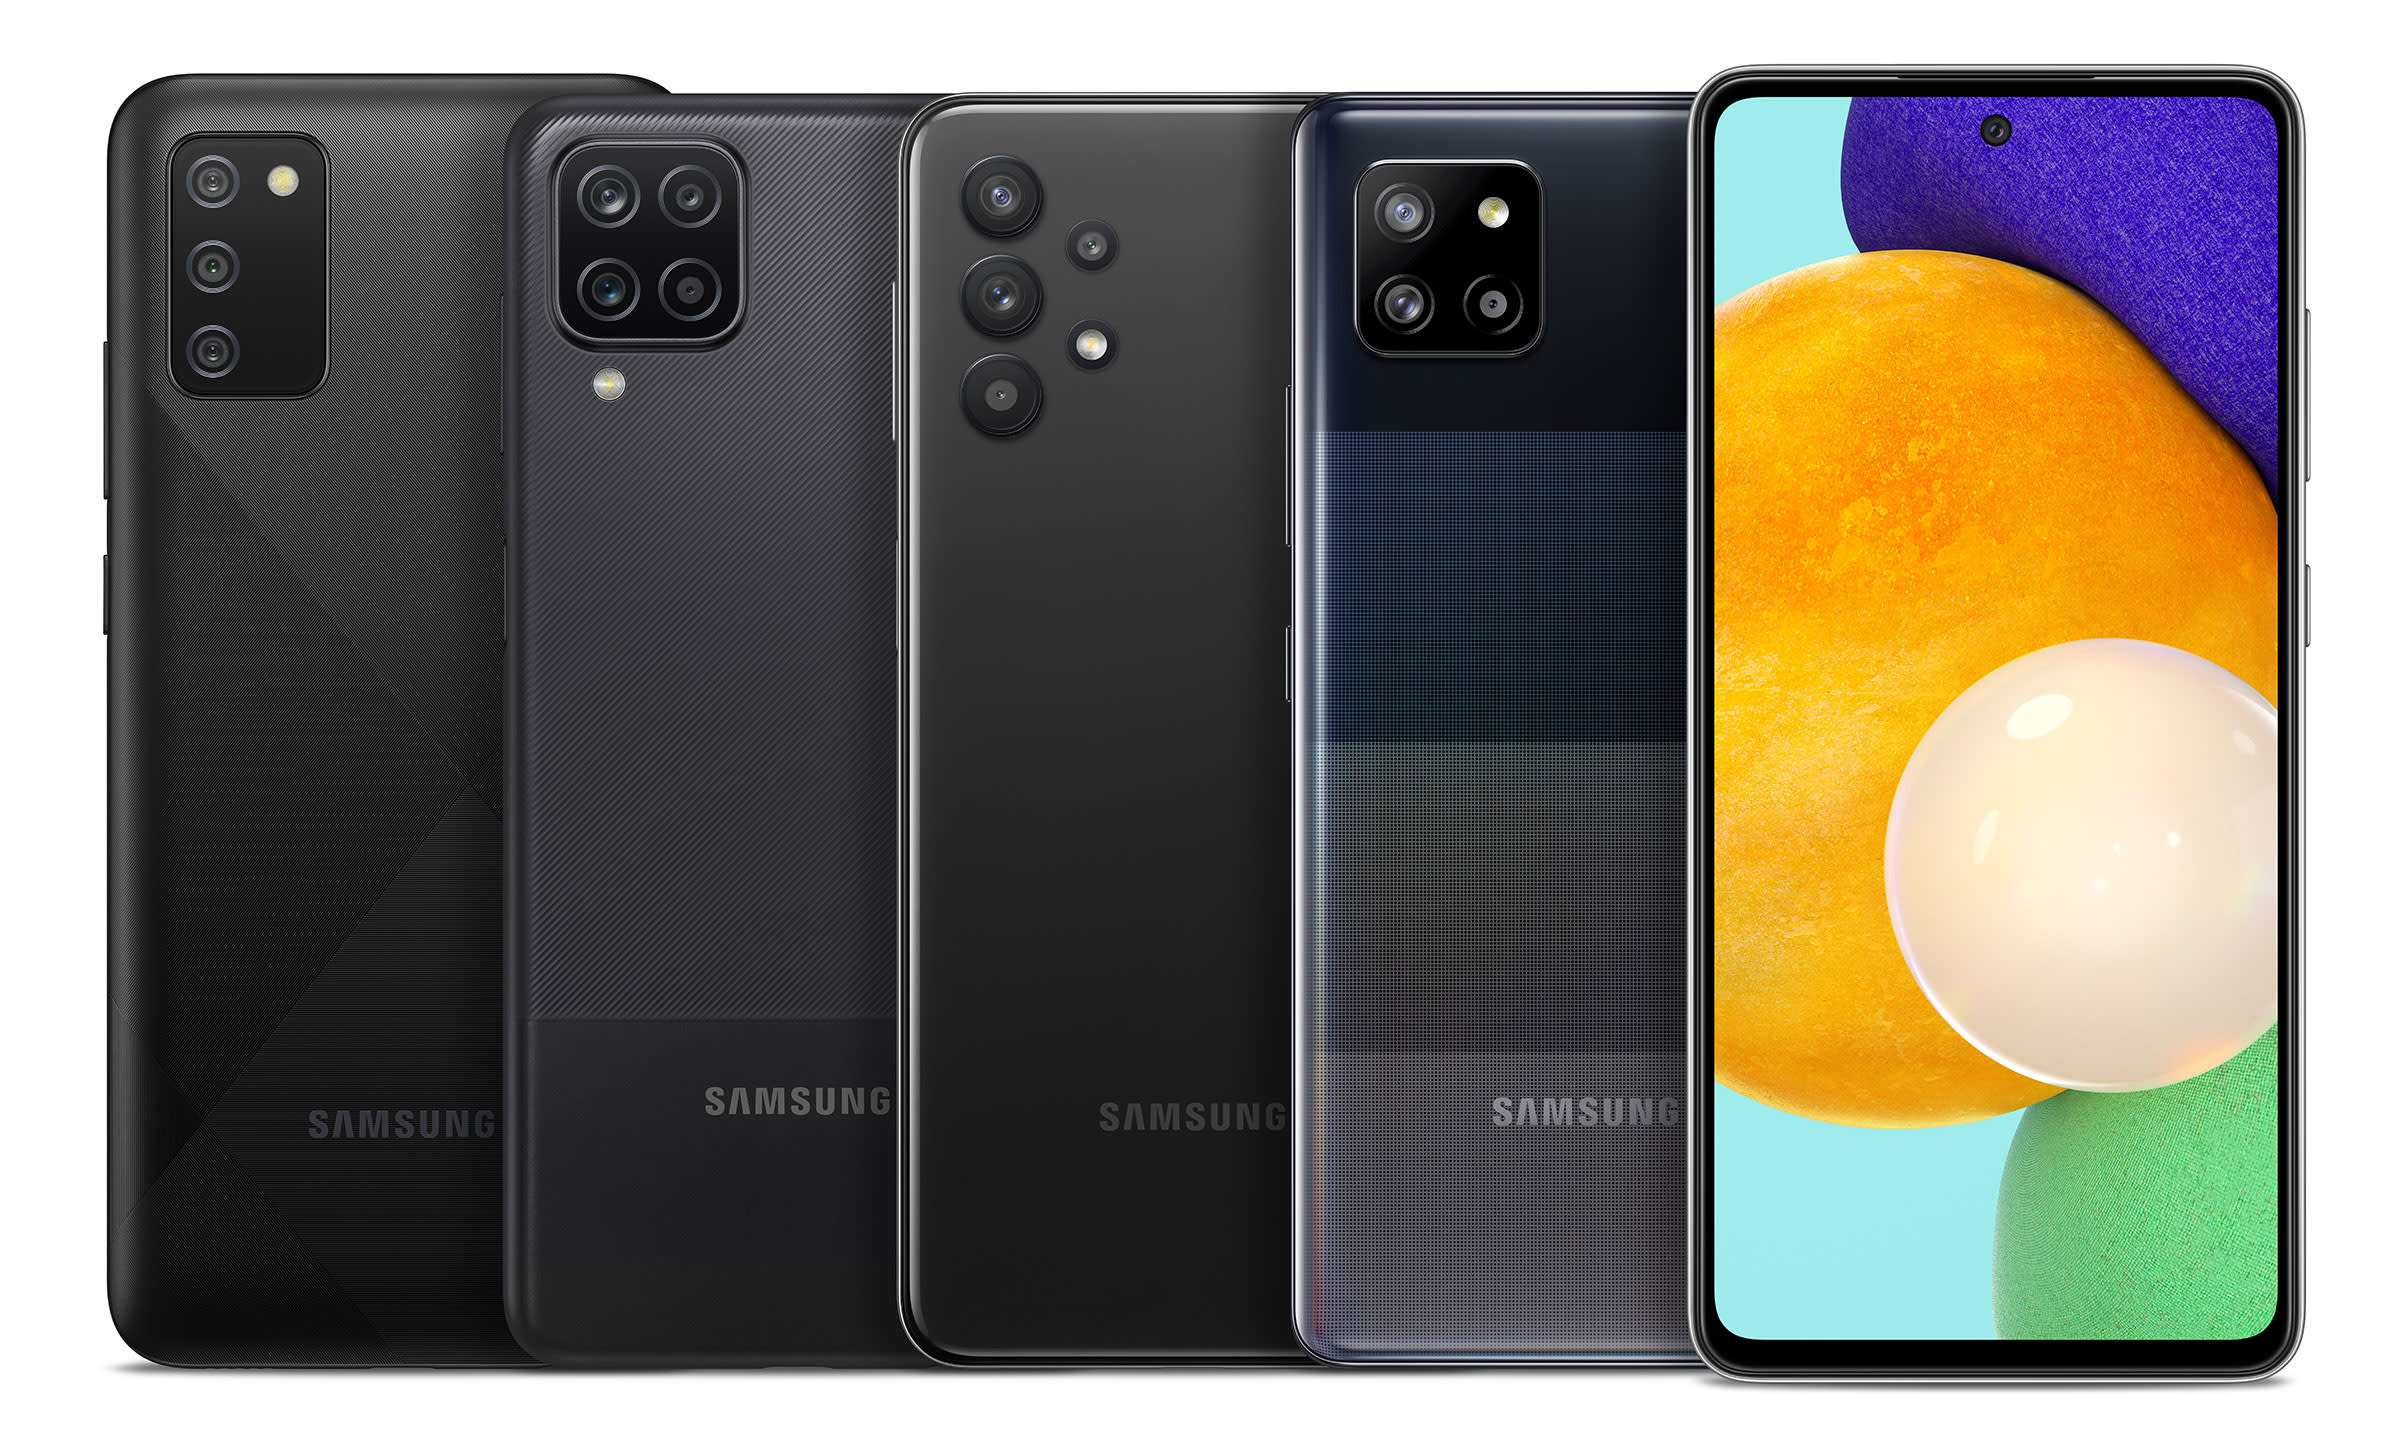 Samsung’s new Galaxy A phone lineup includes its cheapest 5G model yet